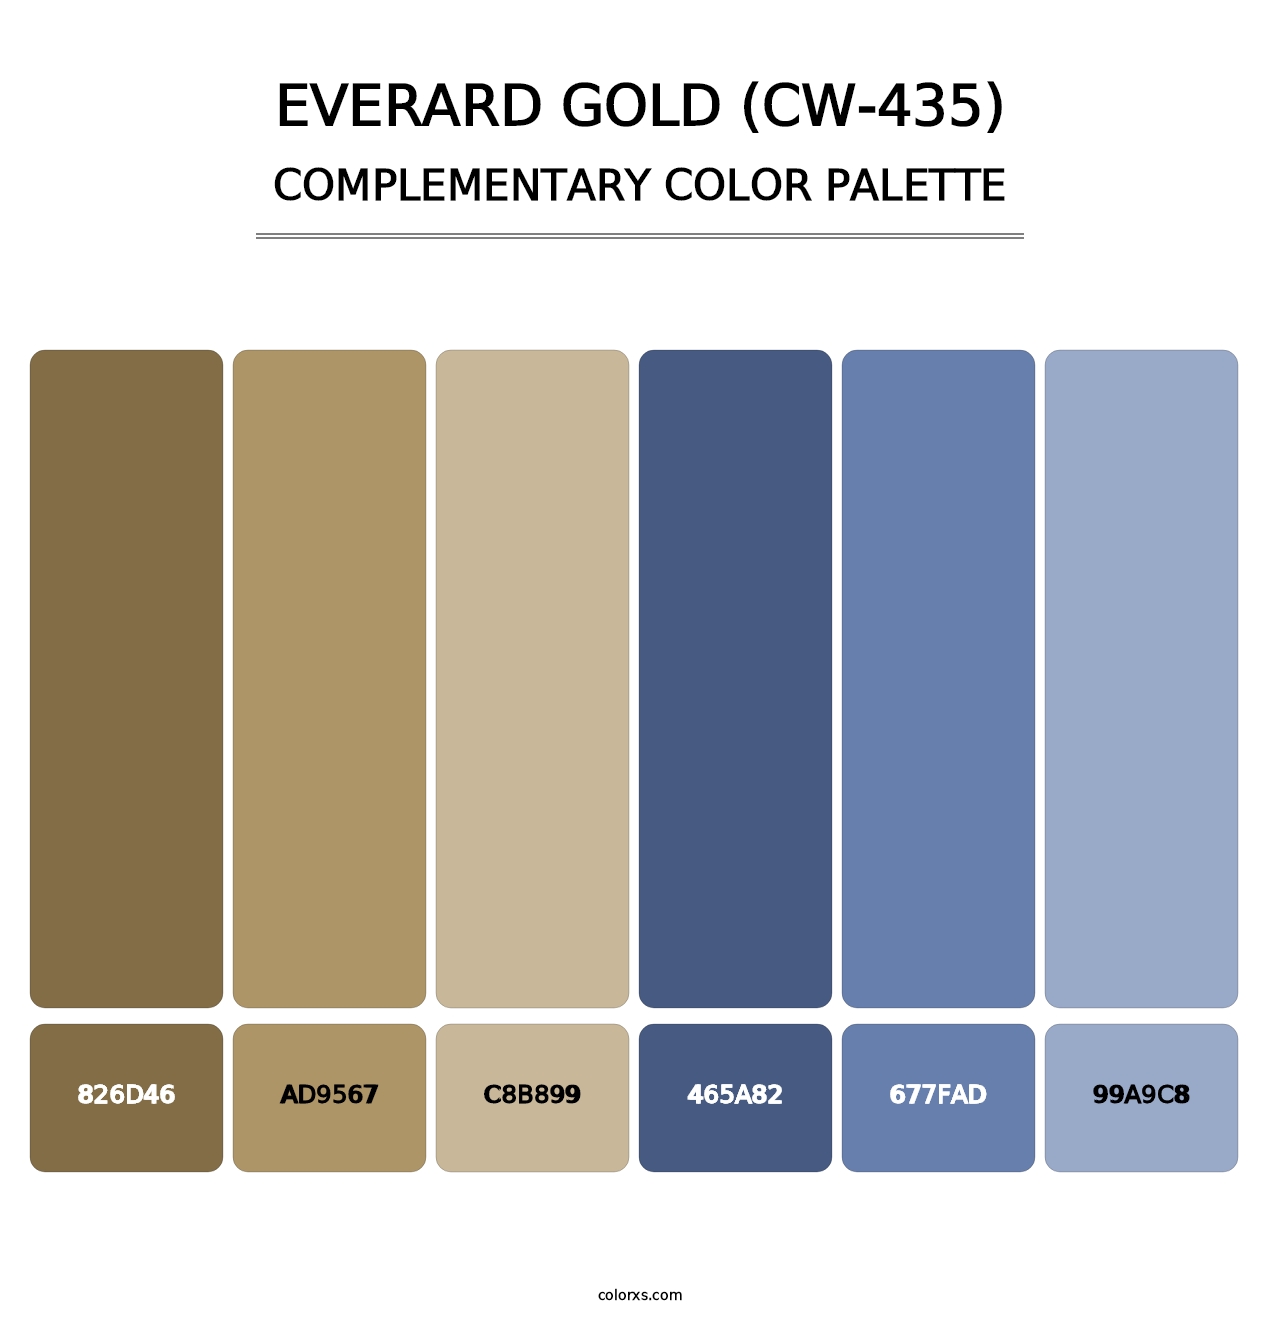 Everard Gold (CW-435) - Complementary Color Palette